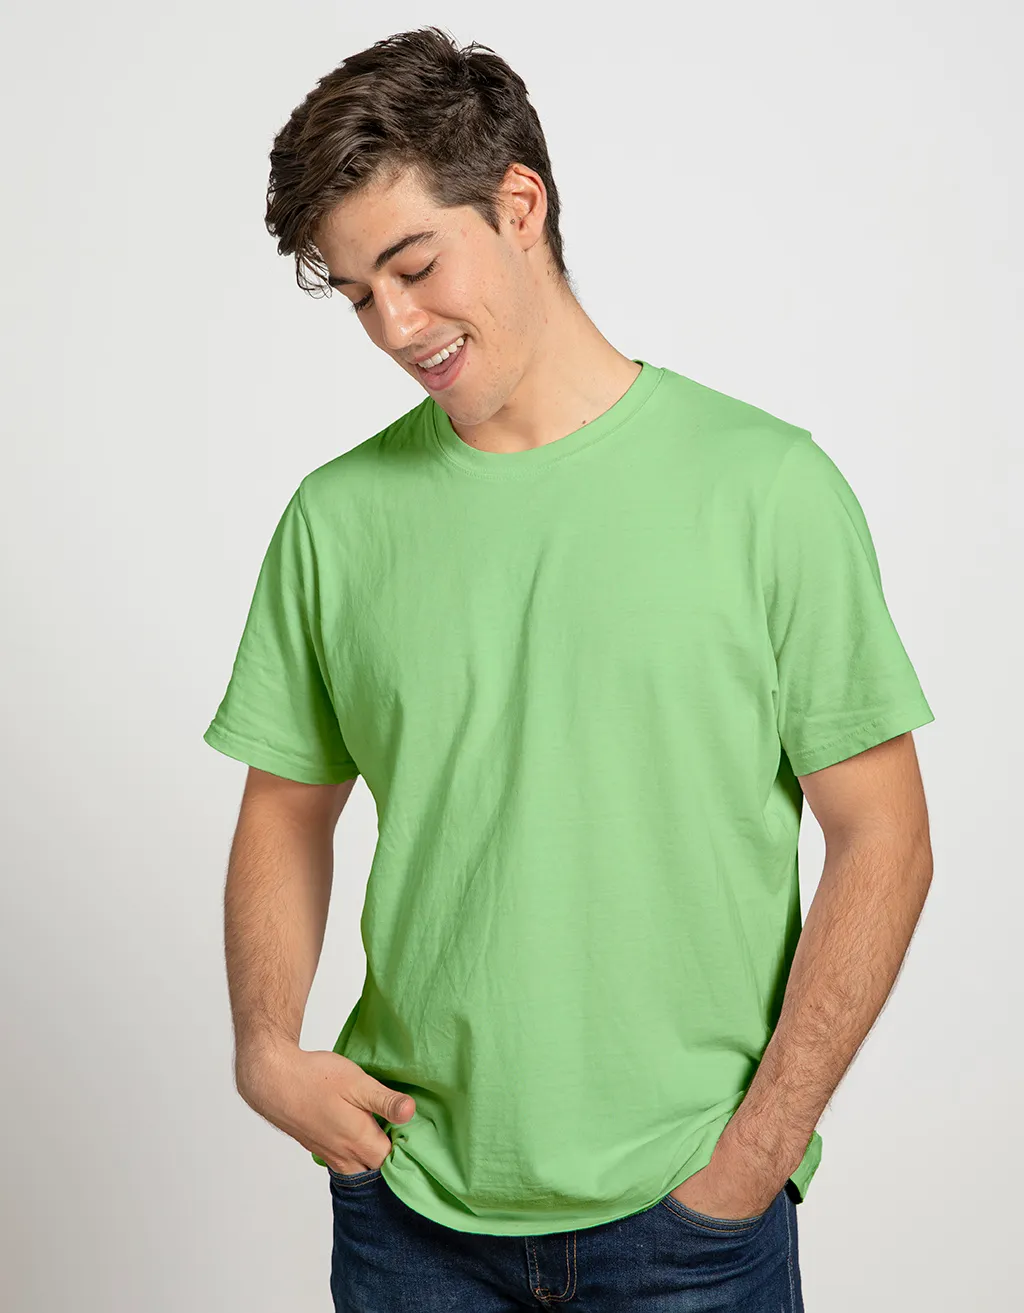 kiwi green t shirt for mens in india online franky bros brand